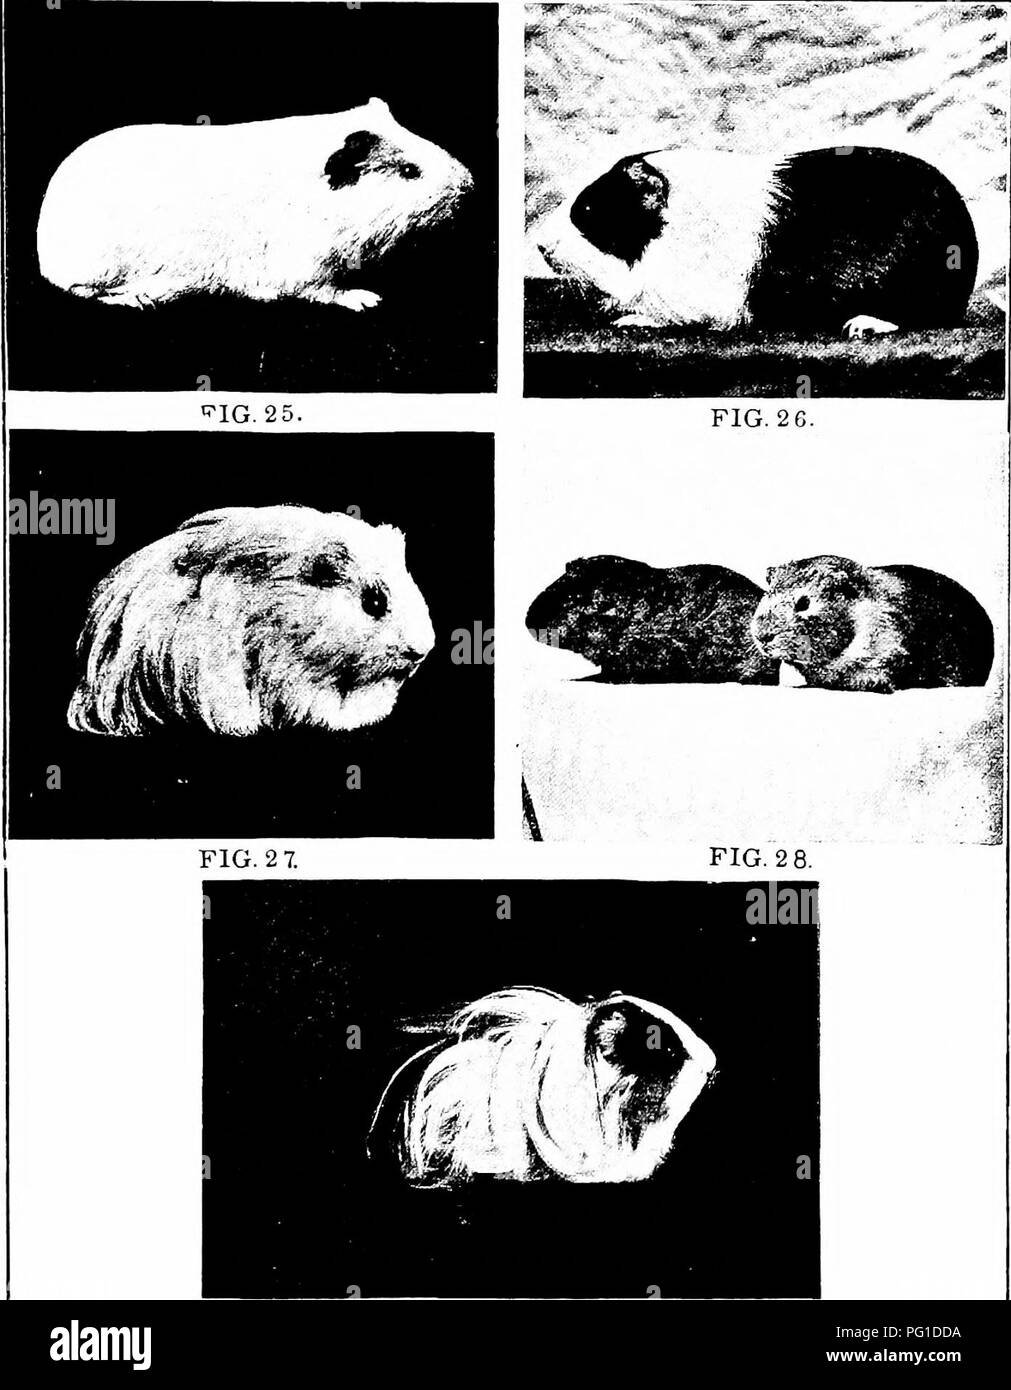 . Heredity in relation to evolution and animal breeding, . Heredity. FIG. 2 9. ¥ia. 25. — A smooth, white guinea-pig. A second new combination of characters, but obtained first among the grandchildren of such an- imals as are shown in Figs. 22 and 23. Fig. 26. — A short-haired, pigmented guinea-pig. (&quot;Dutch-marked&quot; with white.) Fig. 27. — A long-haired, albino guinea-pig. Fig. 28. — Offspring produced by animals of the sorts shown in Figs. 26 and 27. One show.^ the &quot;Dutch-marked&quot; pattern as a belt of pale yellow; the other docs not. Both are short-haired and pigmented (not  Stock Photo